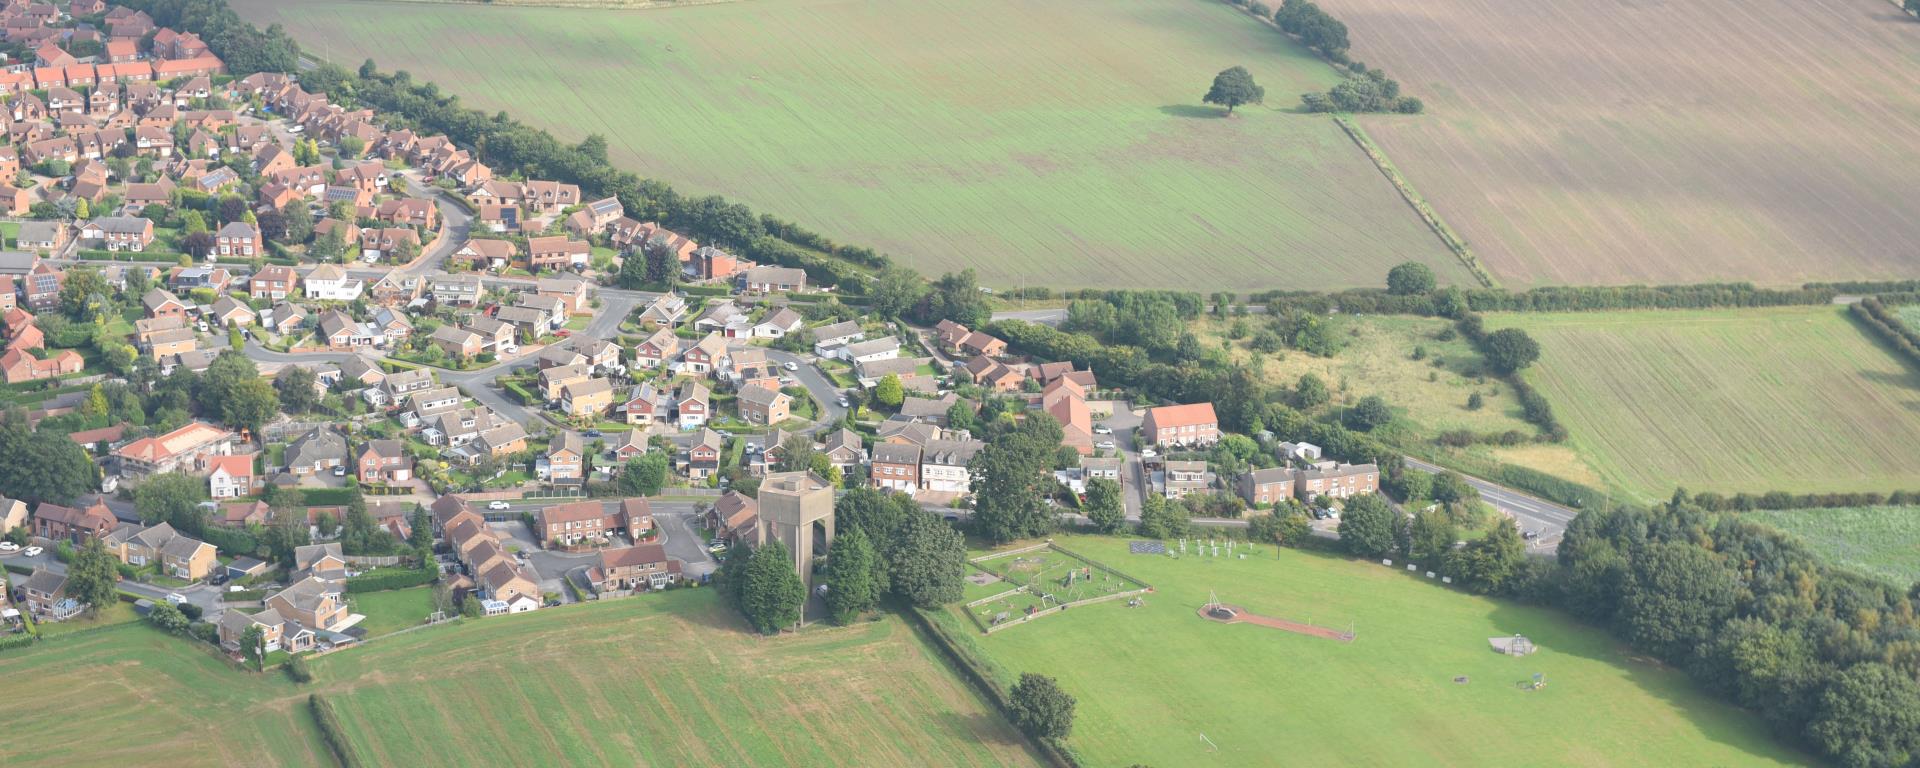 Riccall from the air